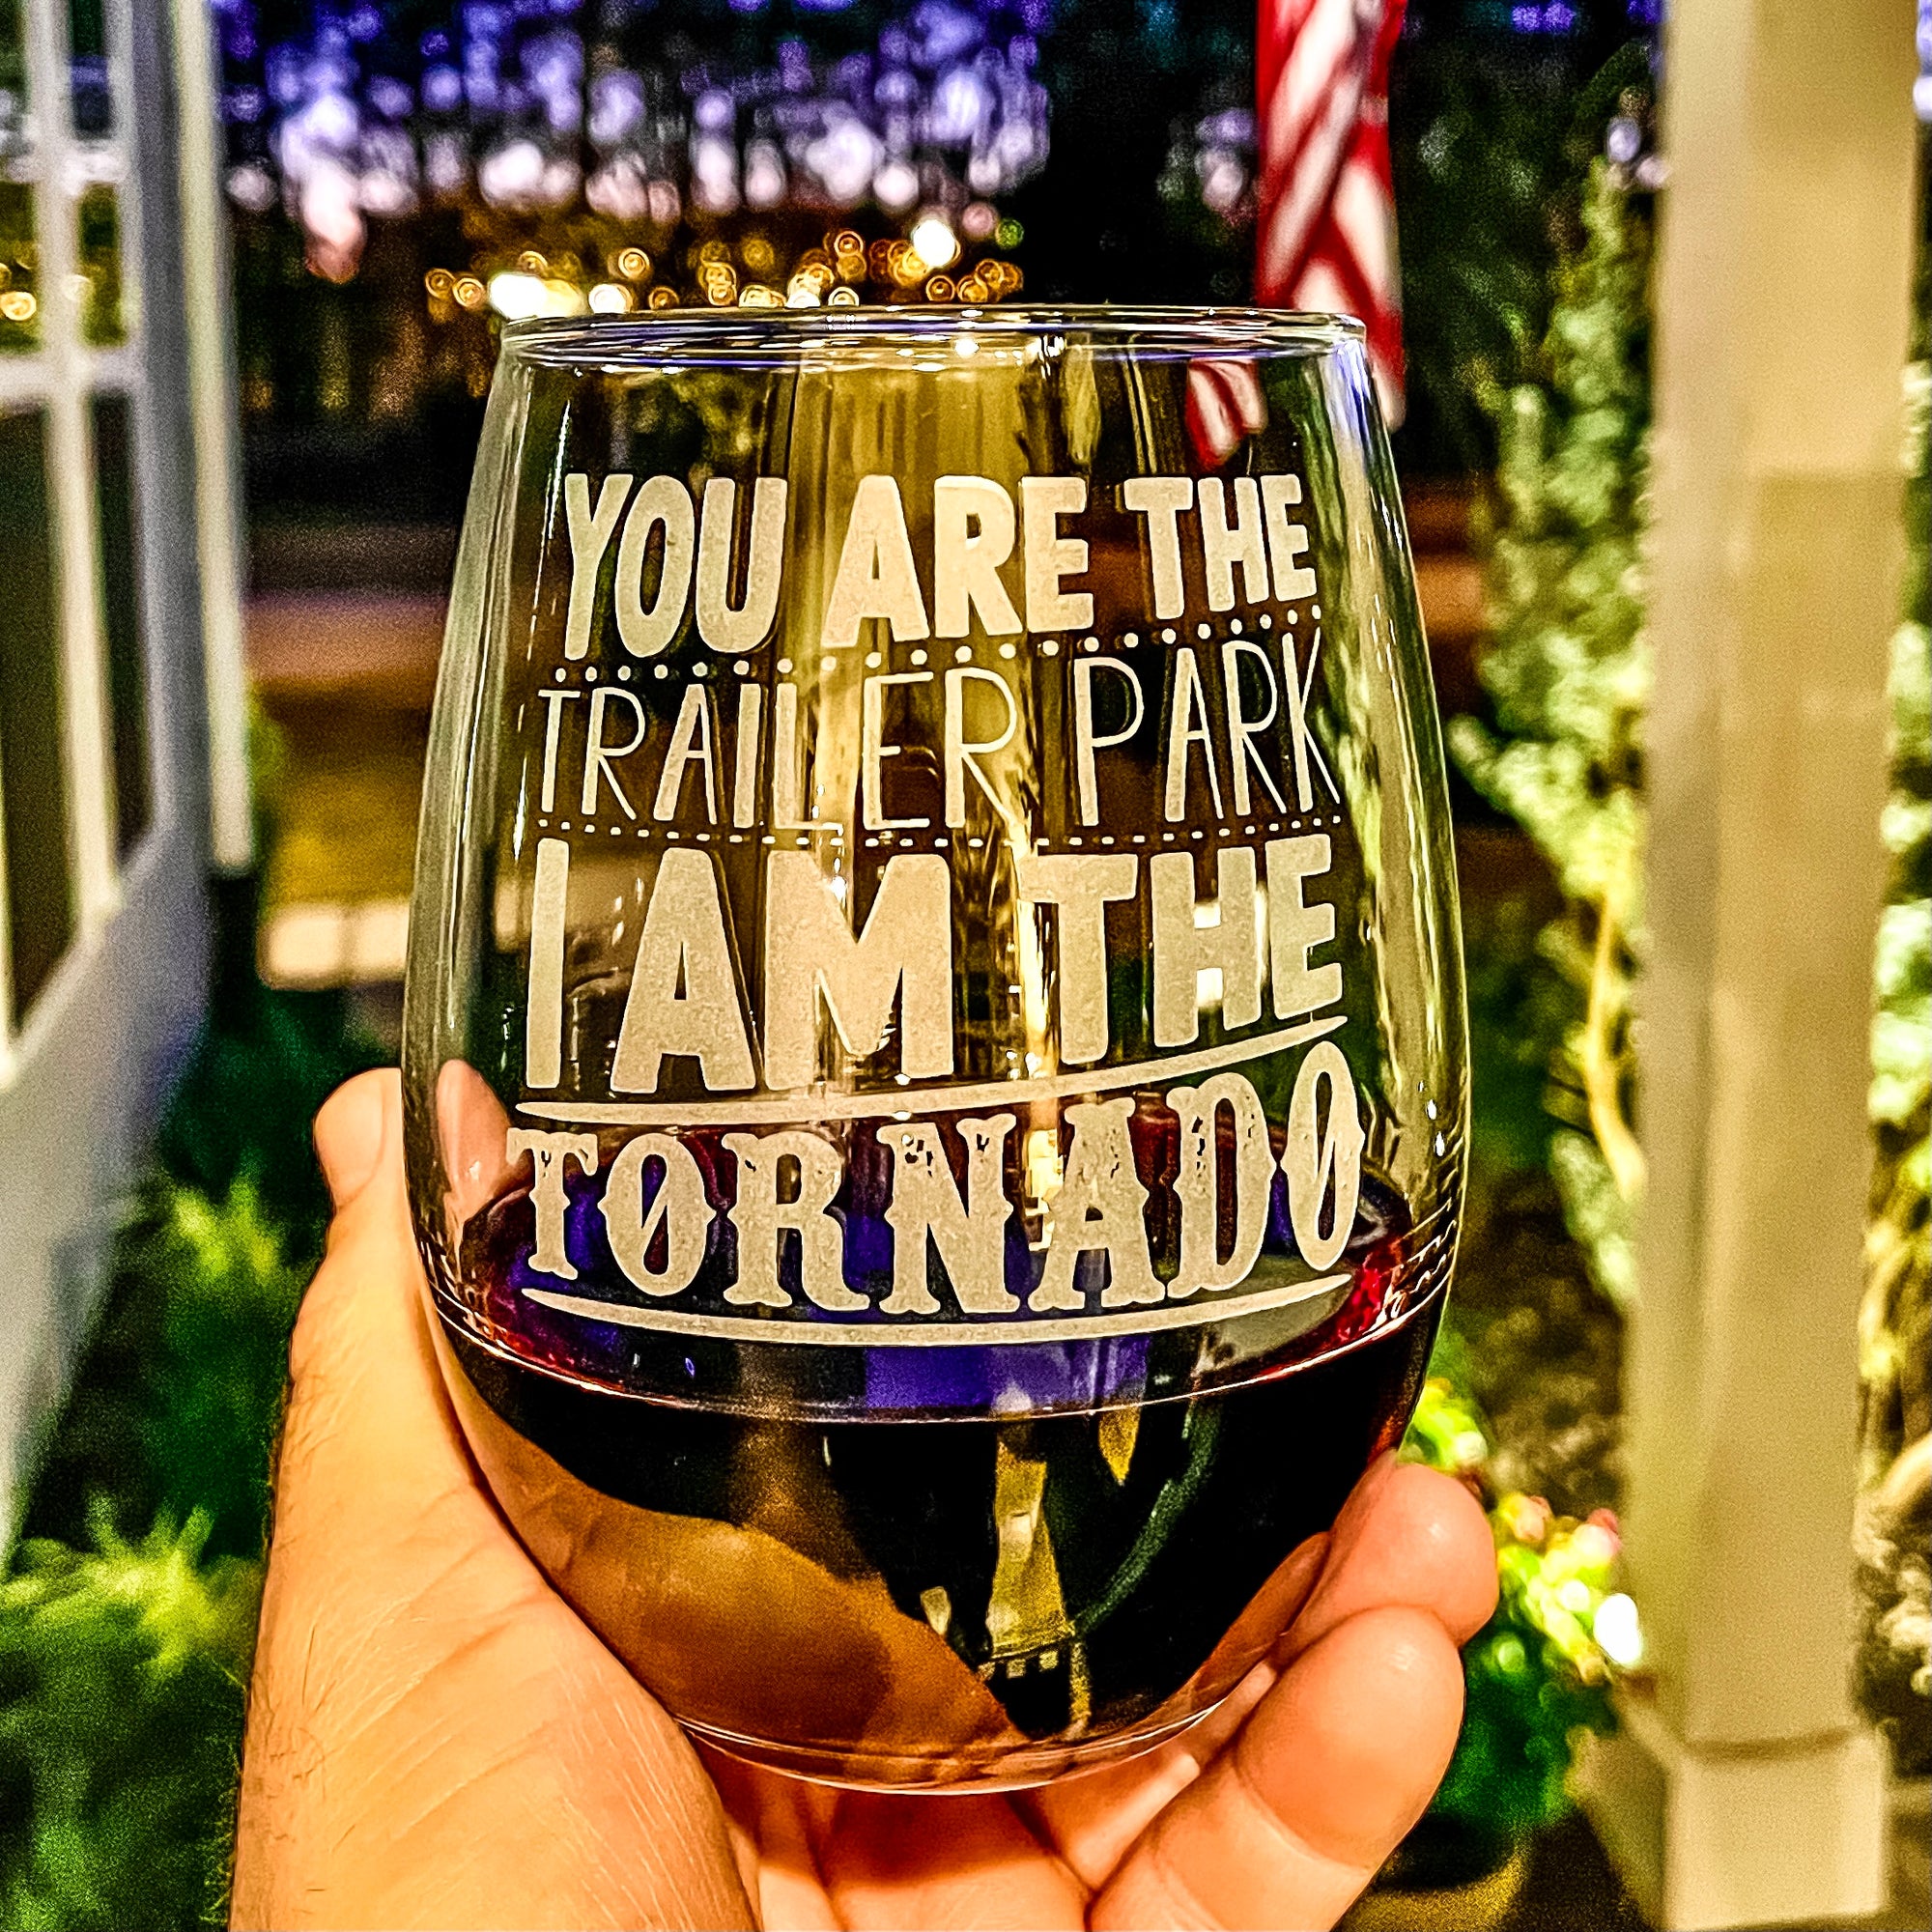 You Had Me At Engraved Stemless Wine Glass Funny Wine Glass Fun Wine  Glass Wine Lover Gift / Valentine's Day Gift